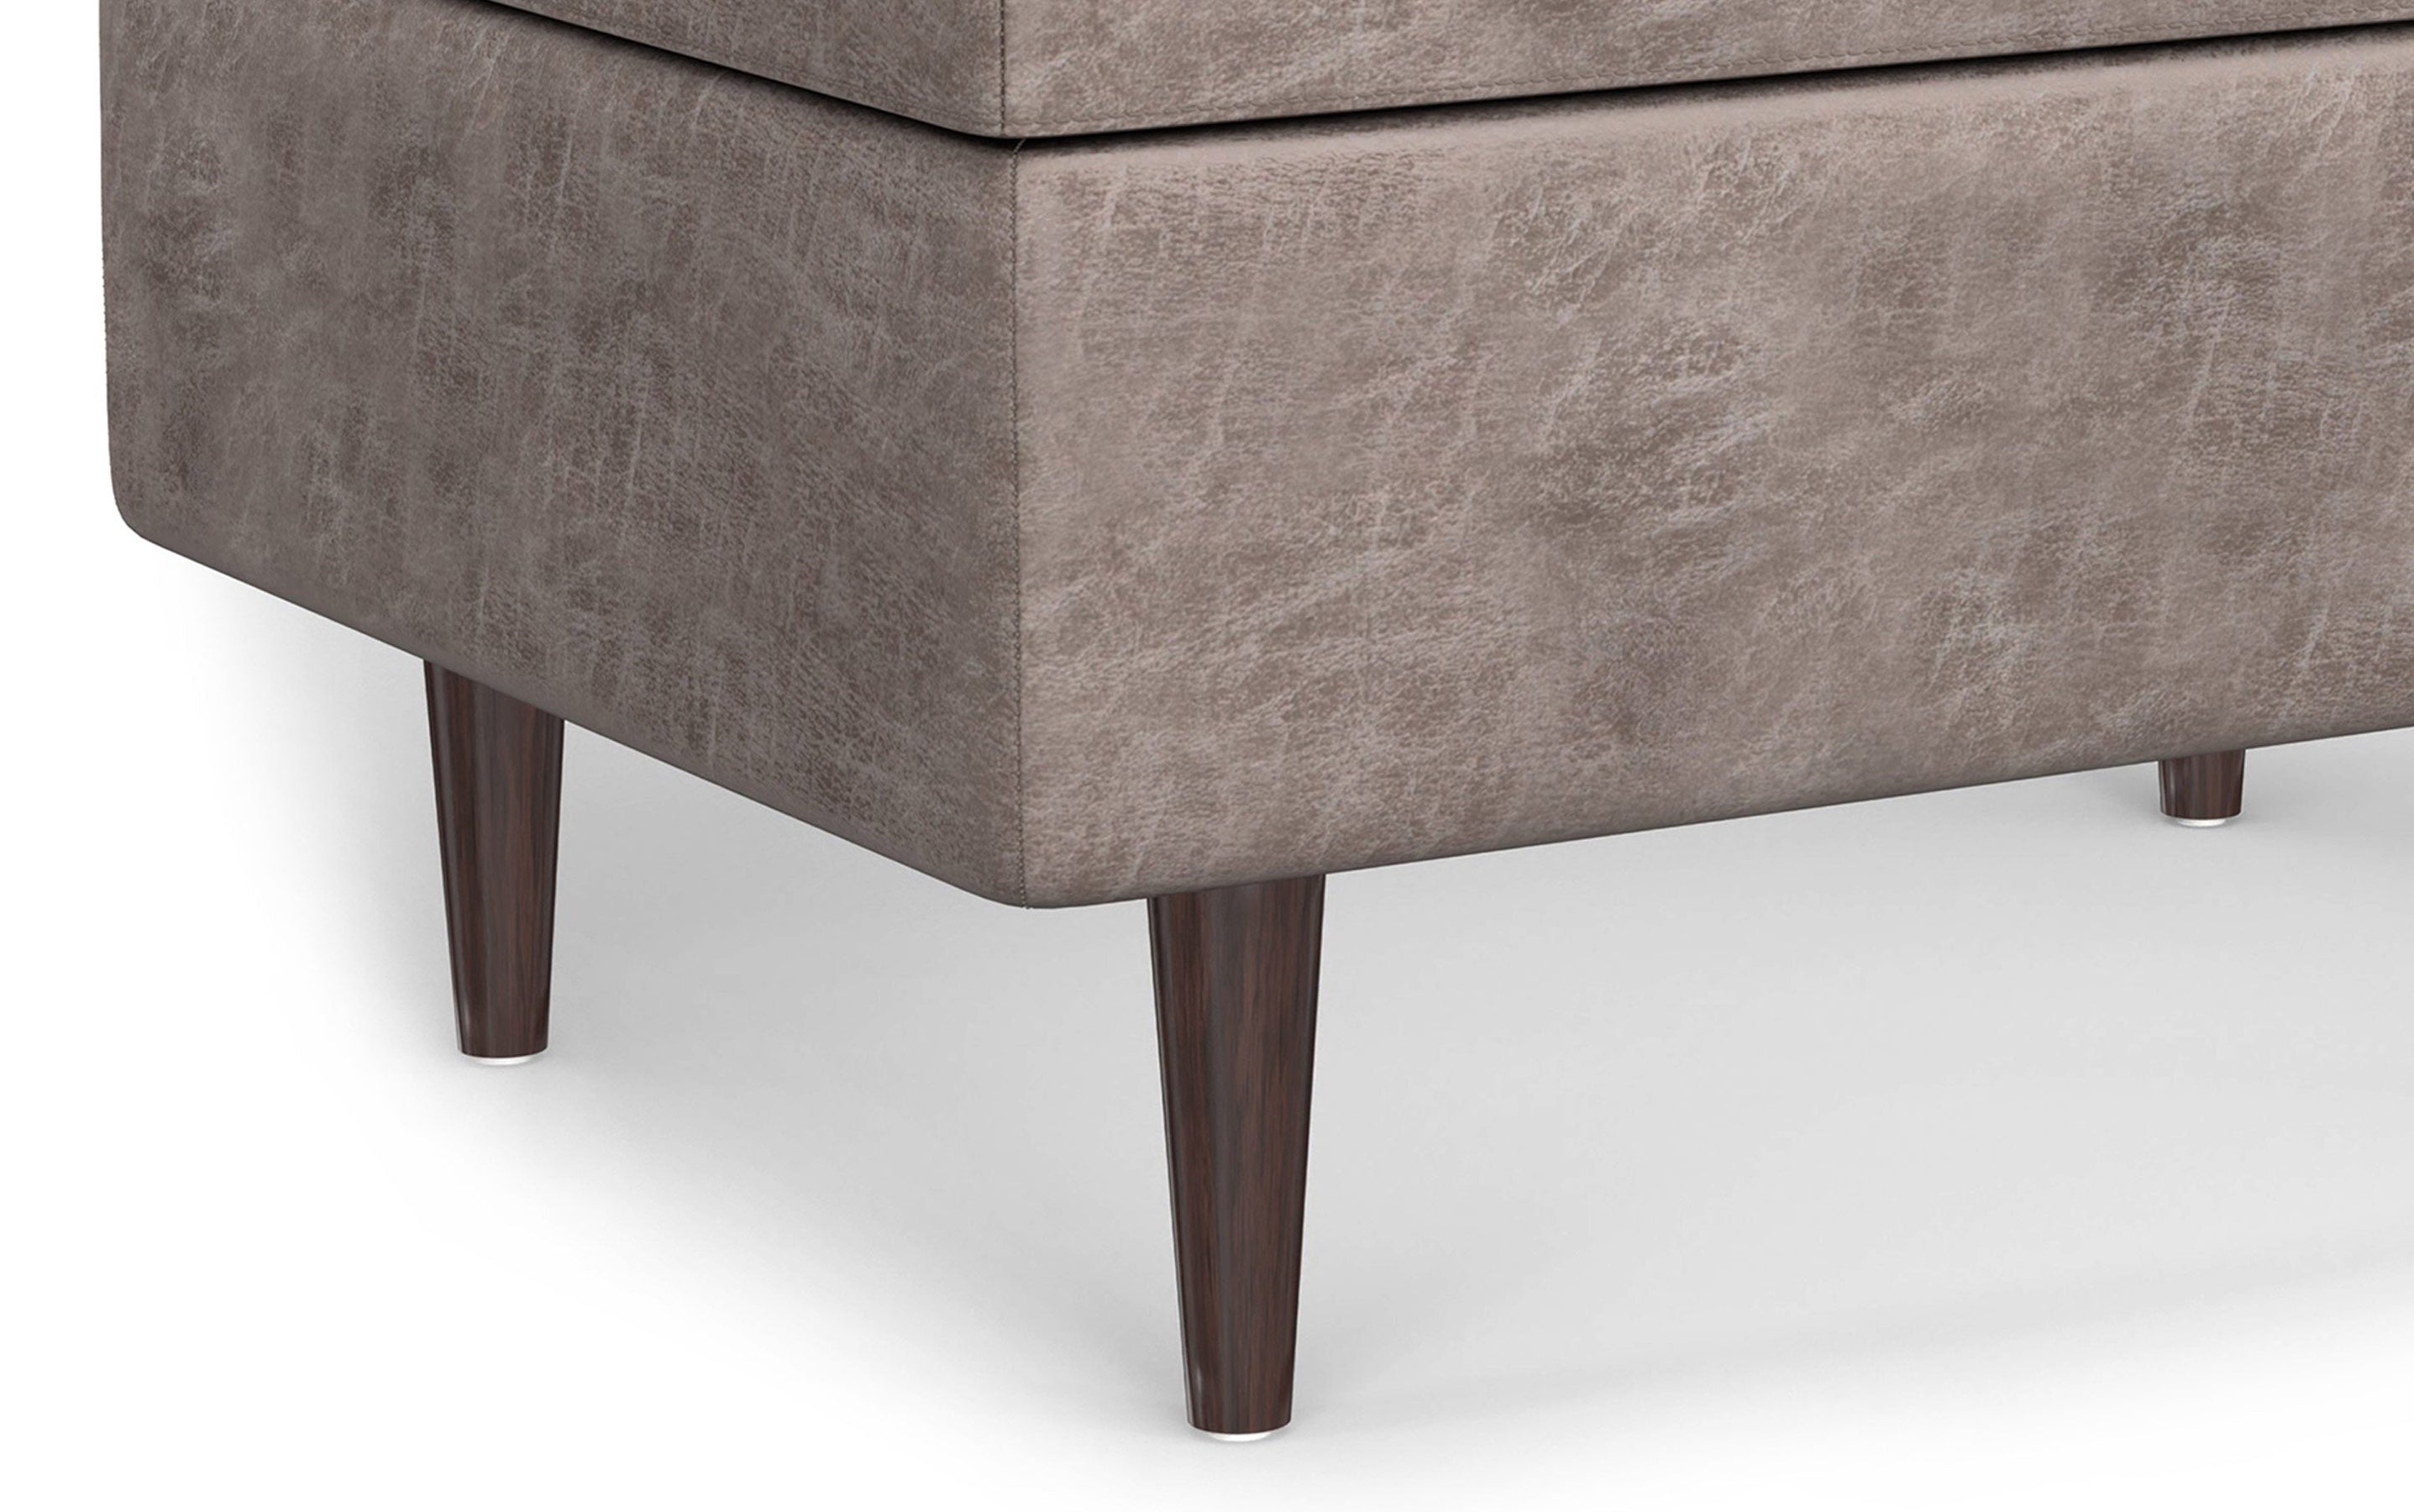 Distressed Grey Taupe Distressed Vegan Leather | Shay Mid Century Small Square Coffee Table Storage Ottoman